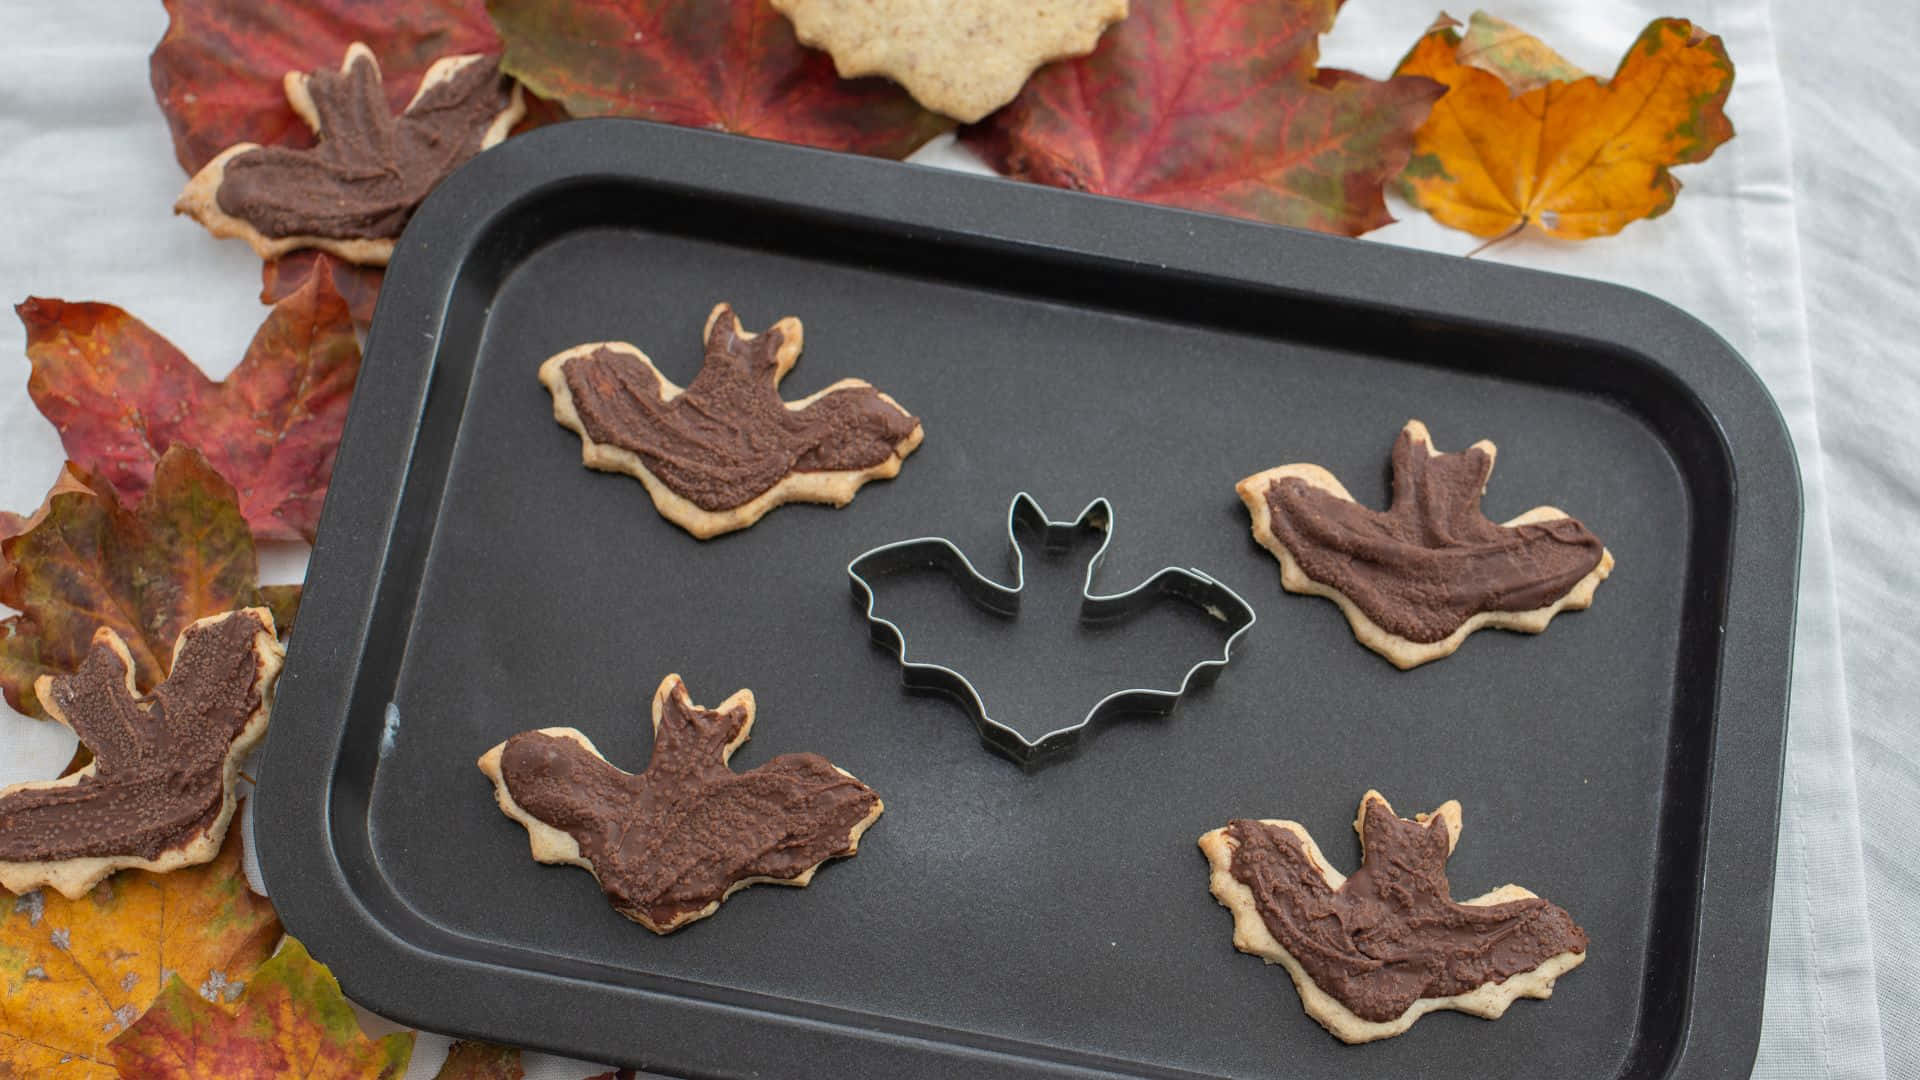 Get ready for Halloween with customizable cookie cutters! Wallpaper